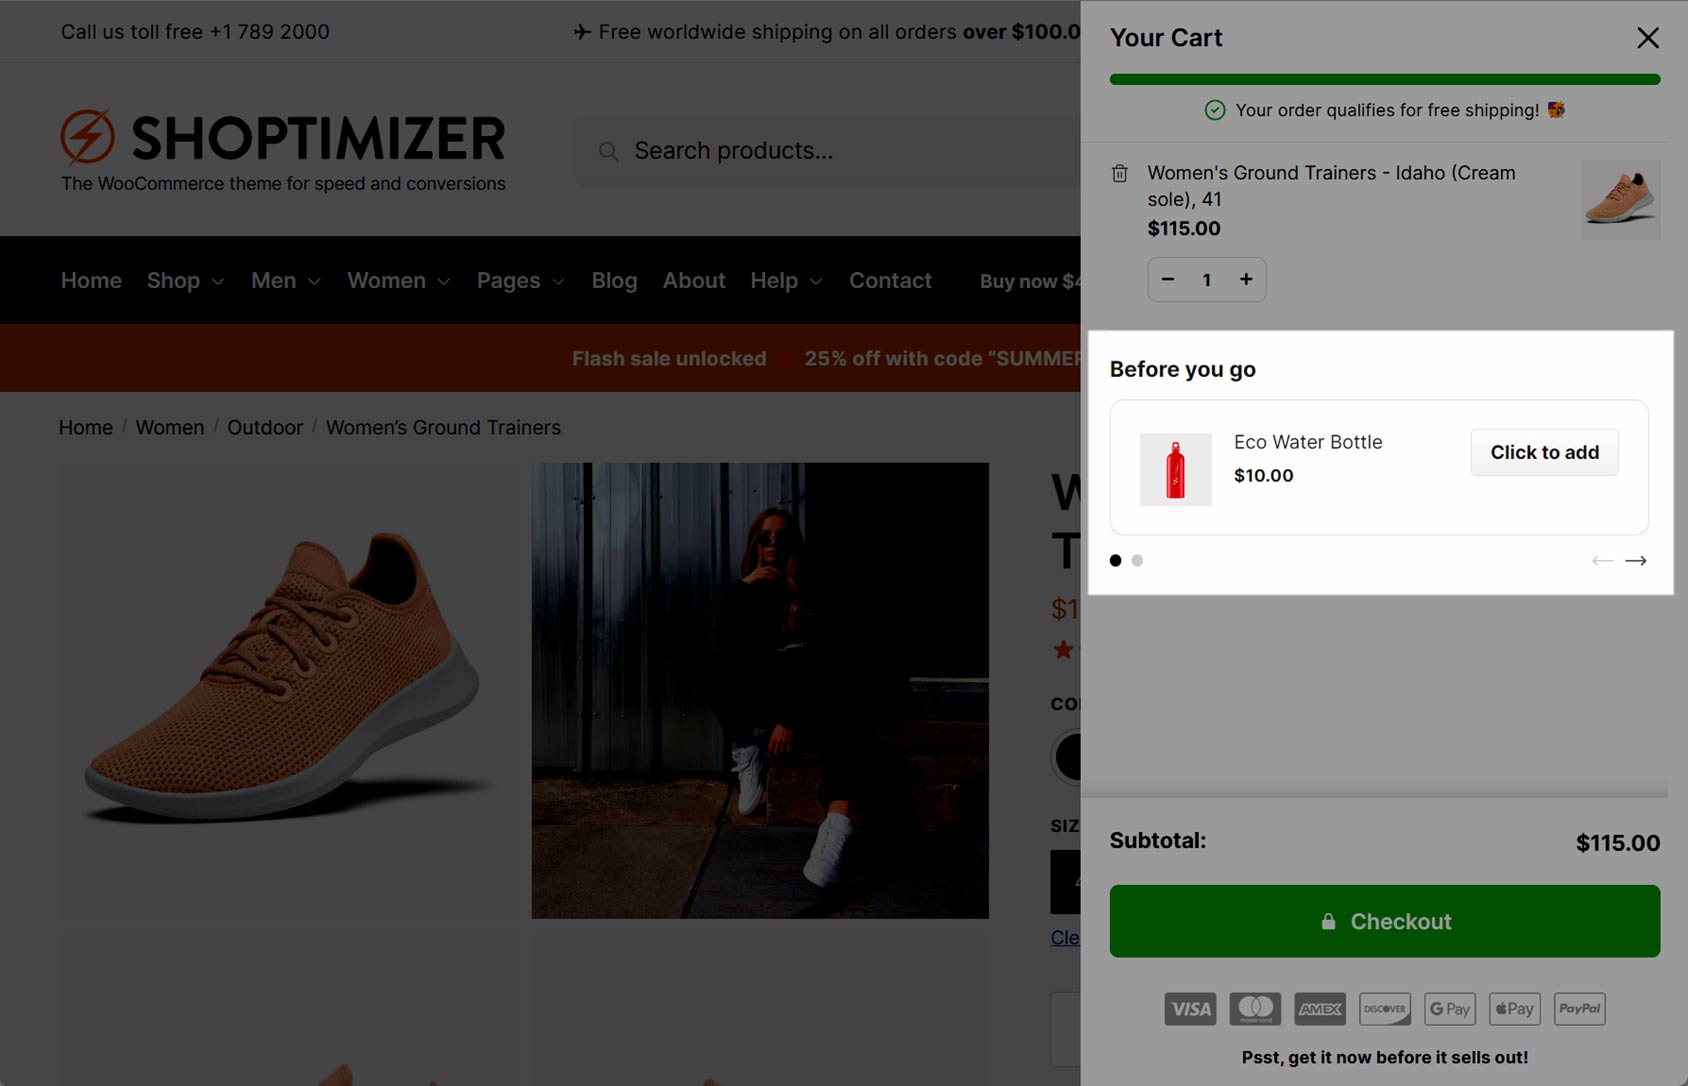 Shoptimizer Theme Cross-Sell Feature Example